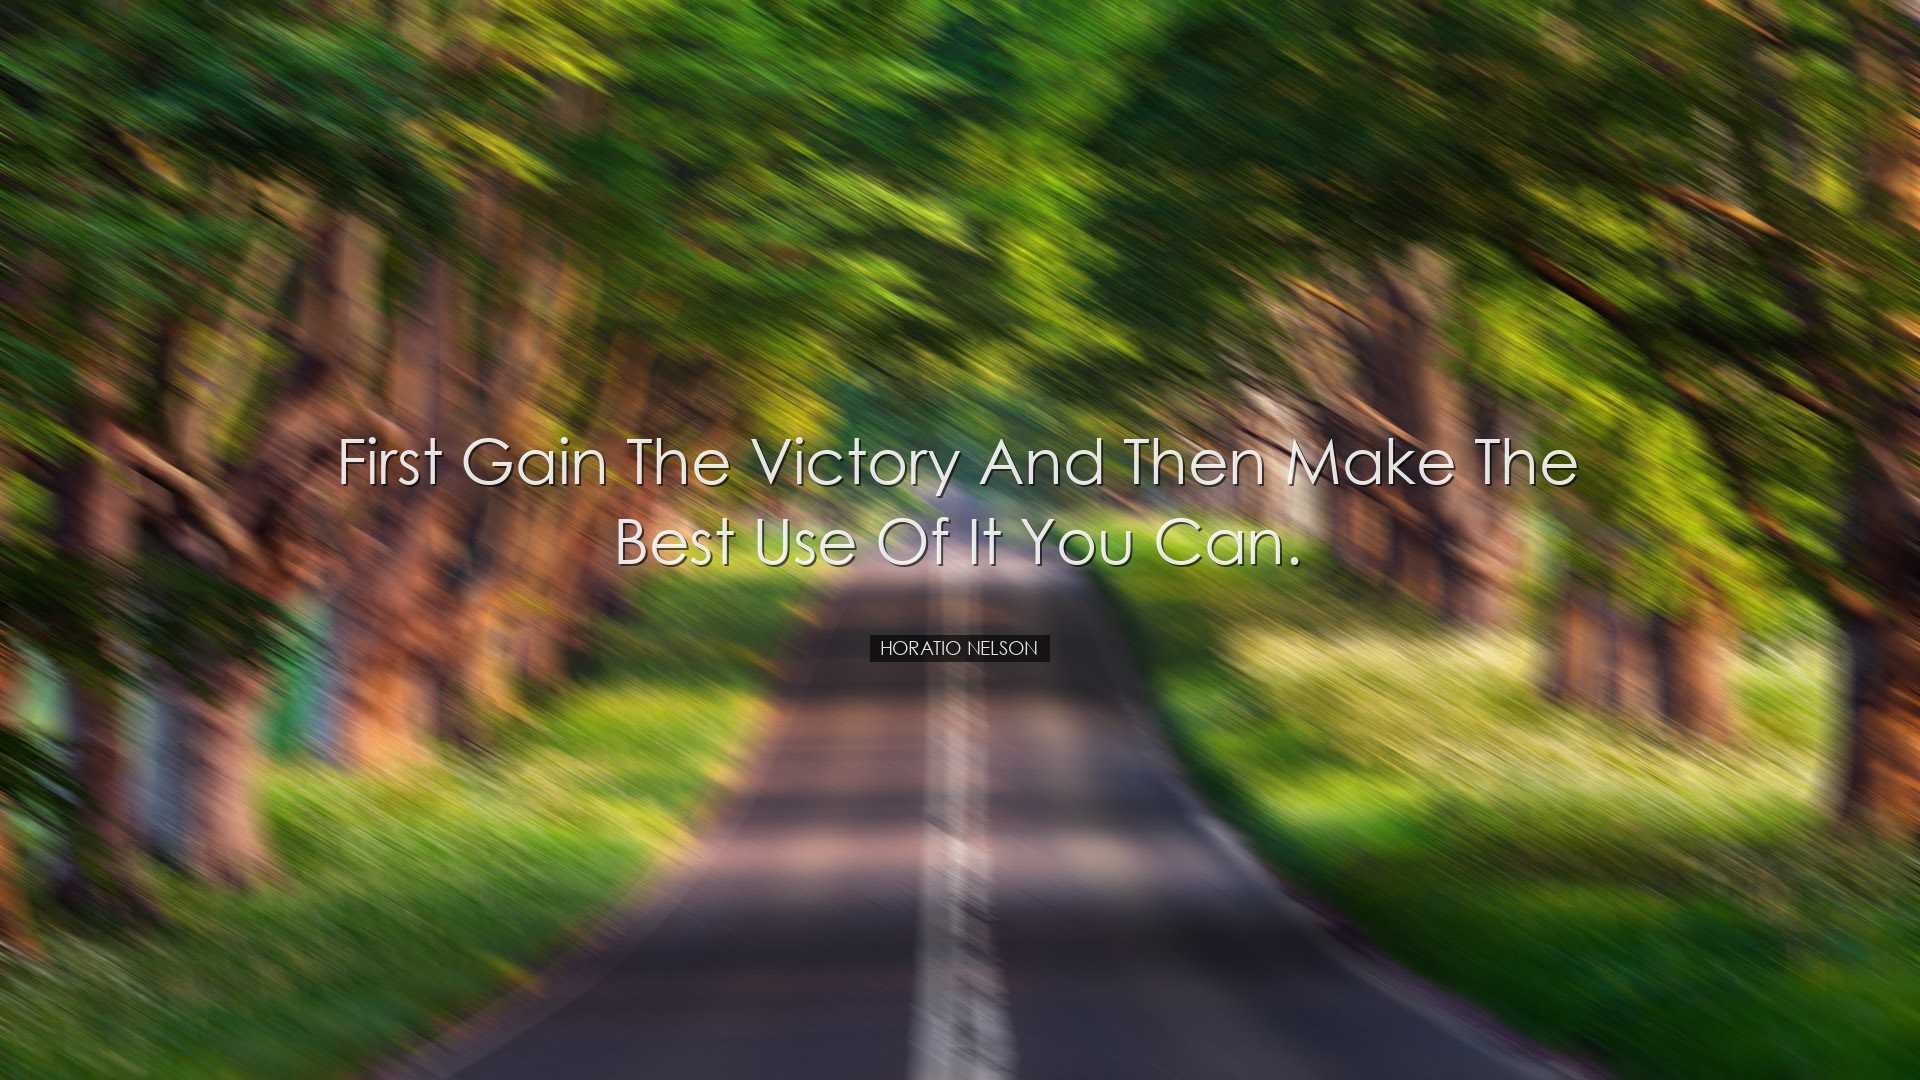 First gain the victory and then make the best use of it you can. -